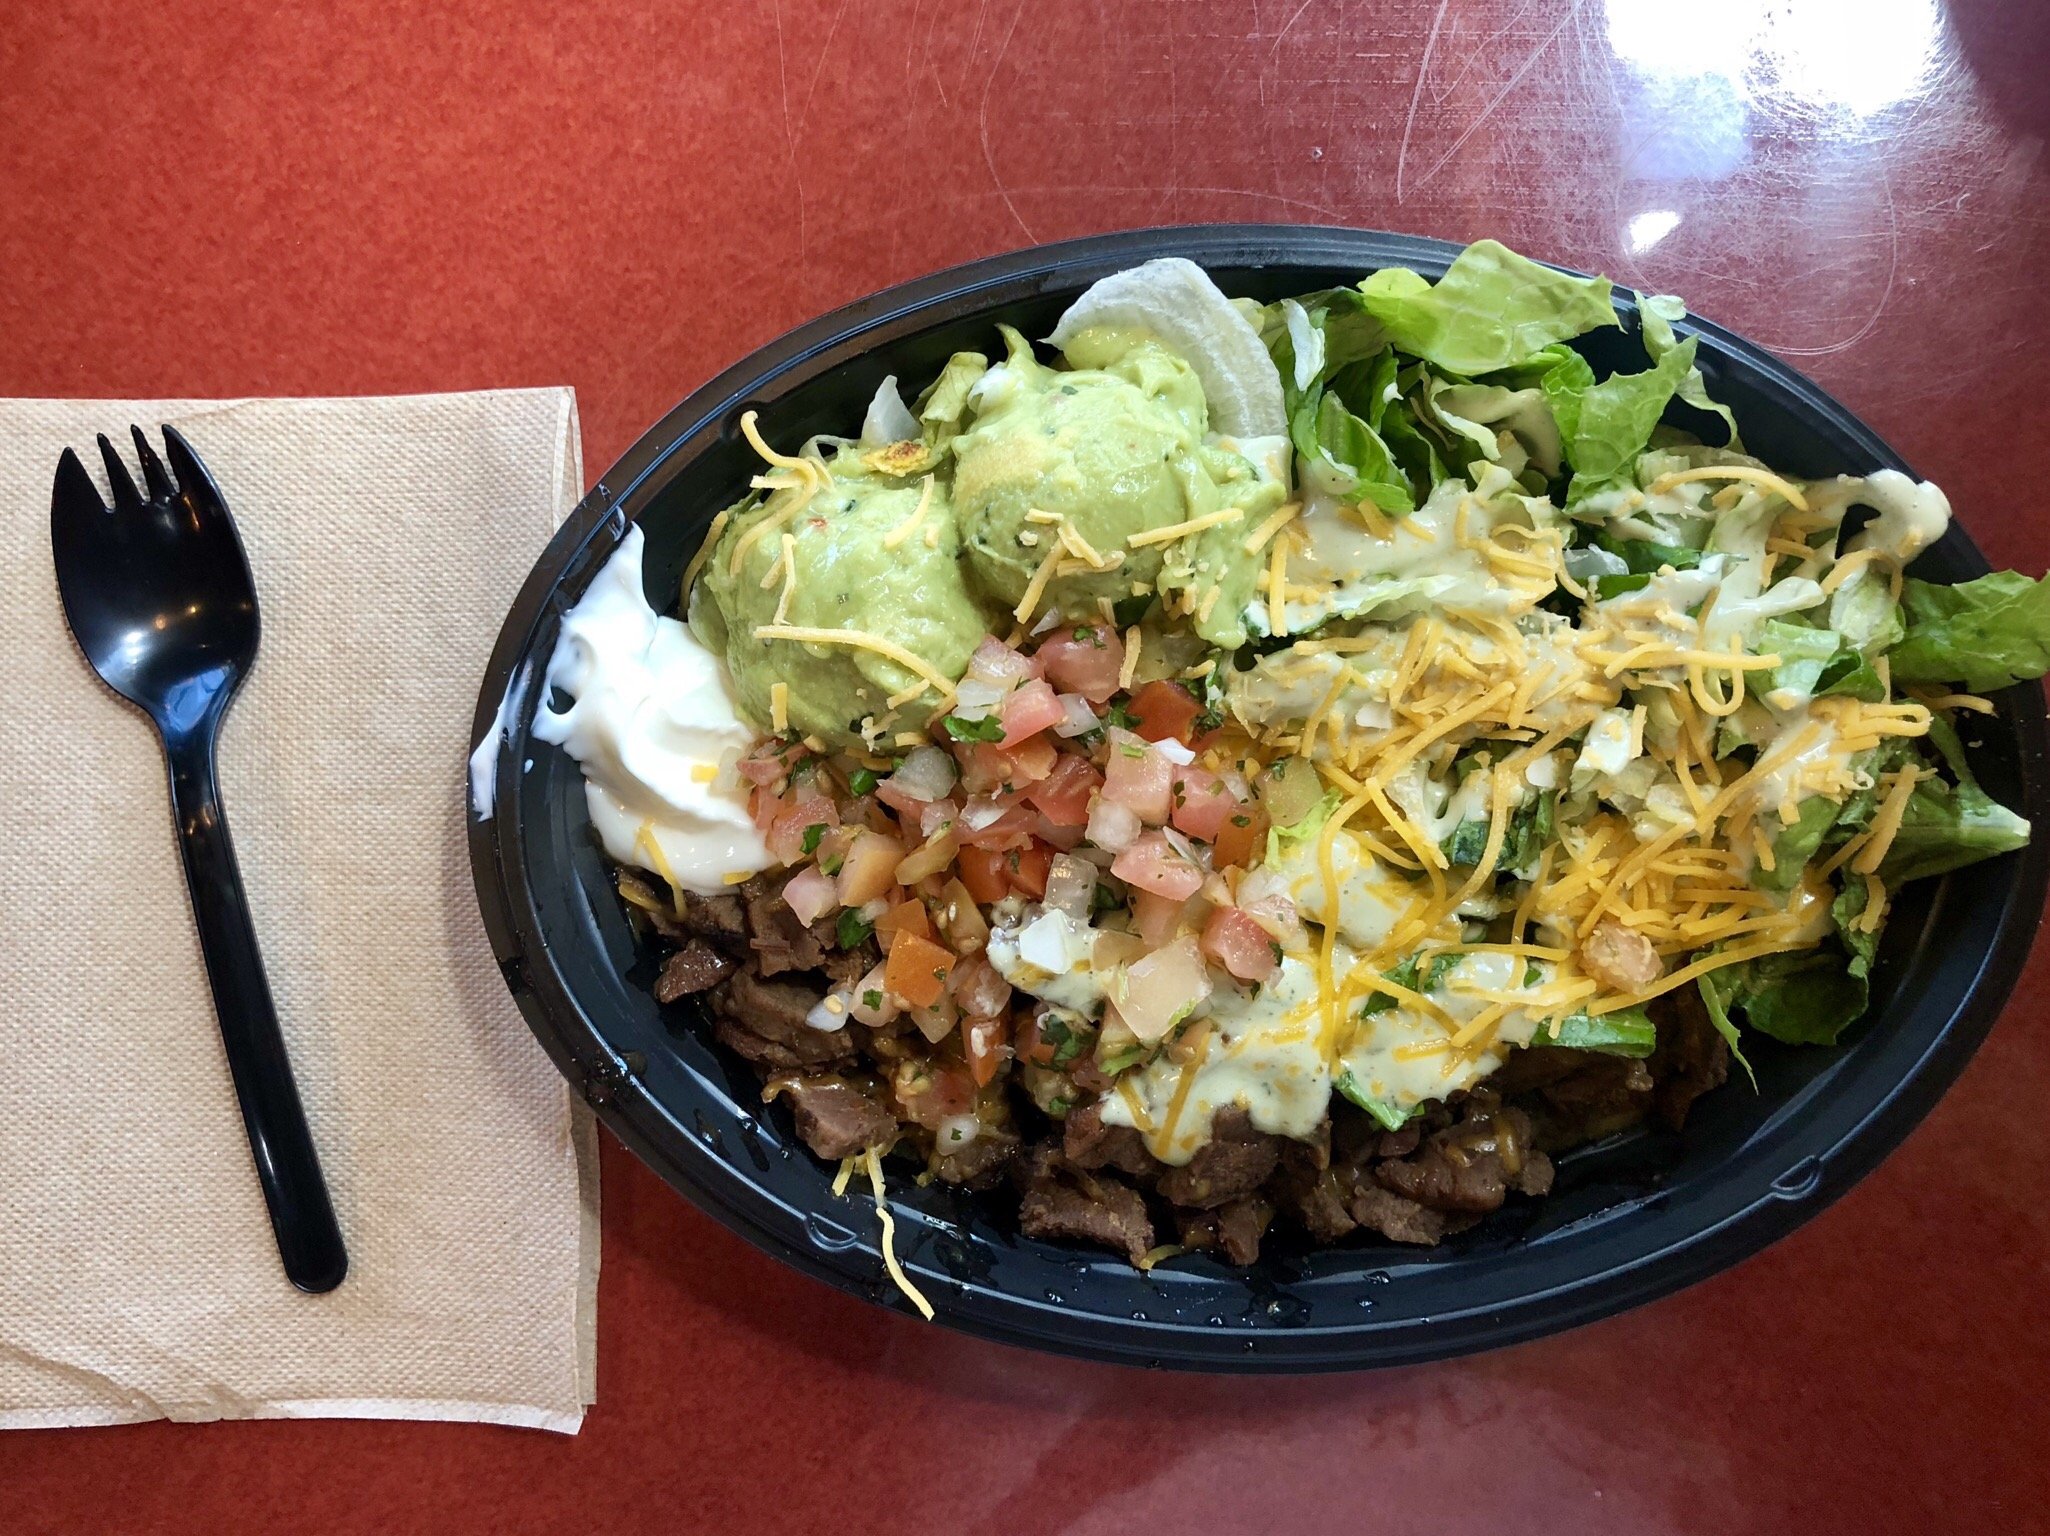 Order Keto at Taco Bell with Our Exclusive Dining Guide